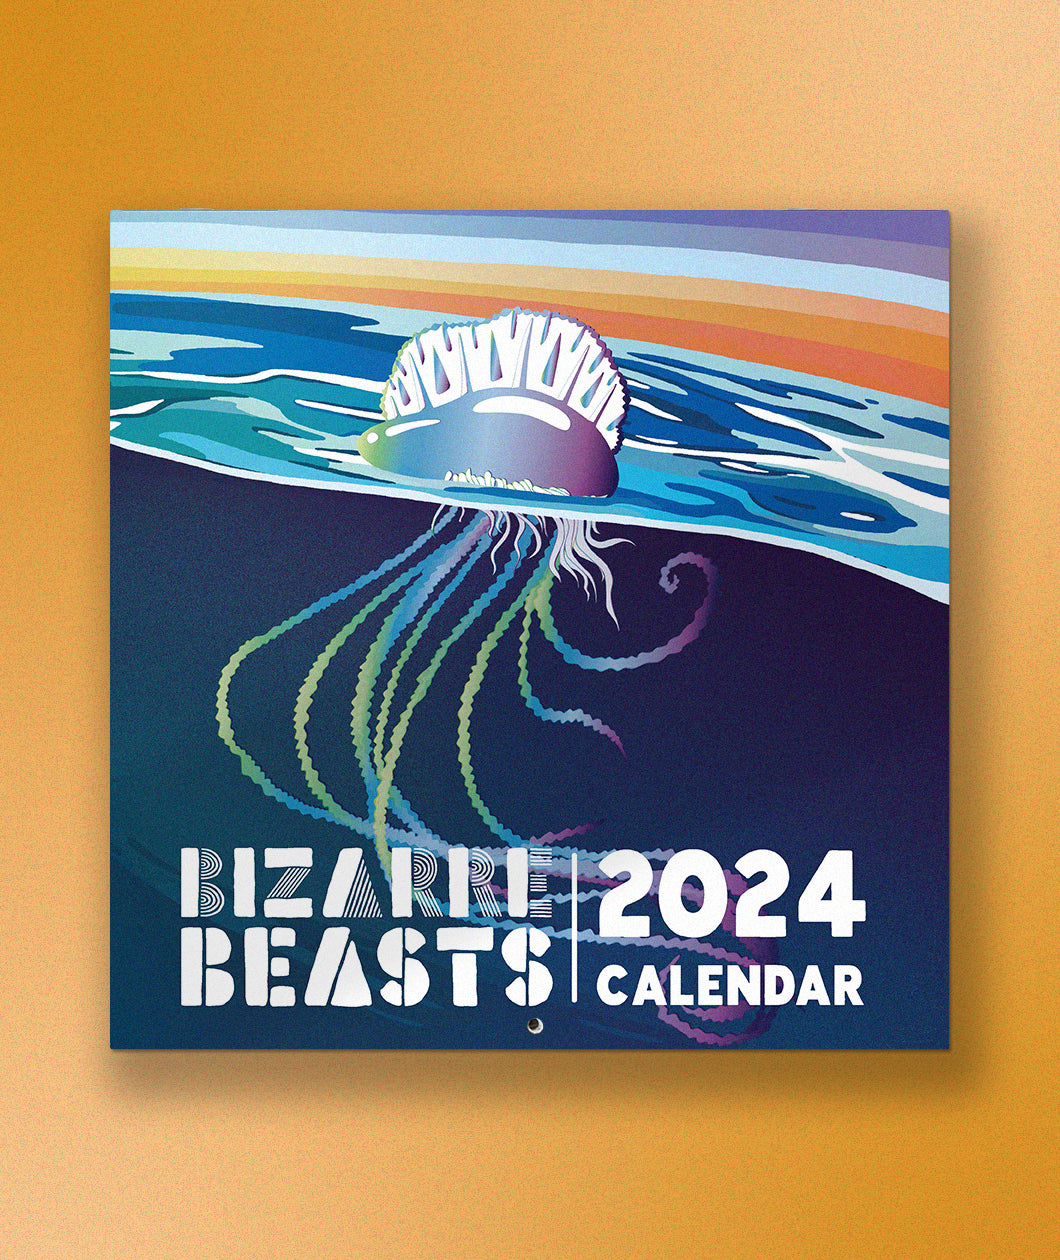 The cover of the Bizarre Beasts 2024 Calendar in front of a yellow background. The cover is a colorful illustration of a jellyfish on the surface of the water.